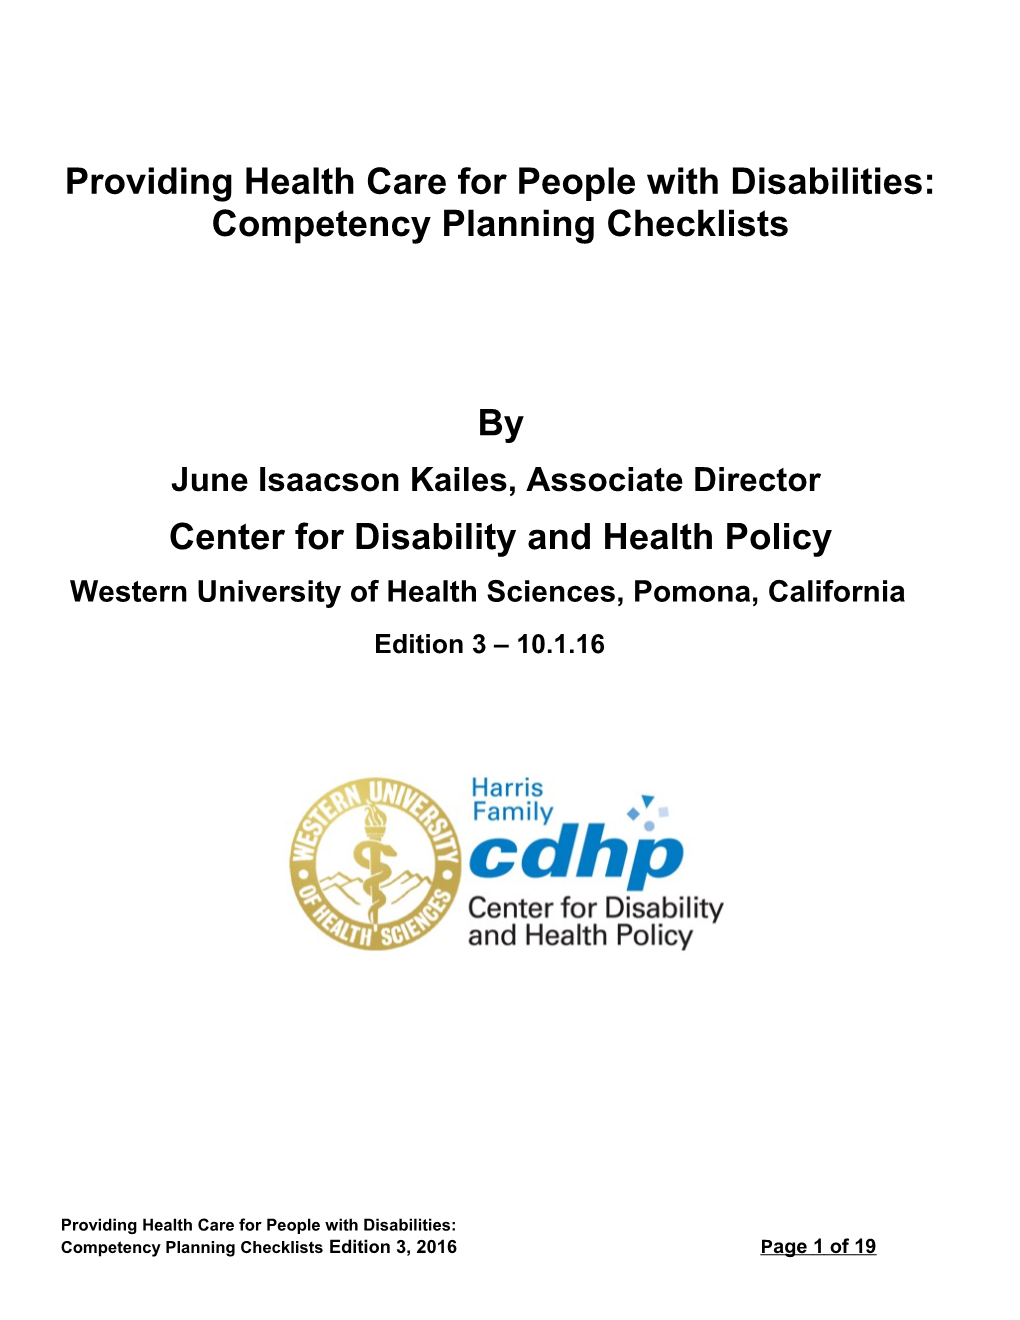 Providing Health Care for People with Disabilities: Awareness, Capacity and Planning Checklists